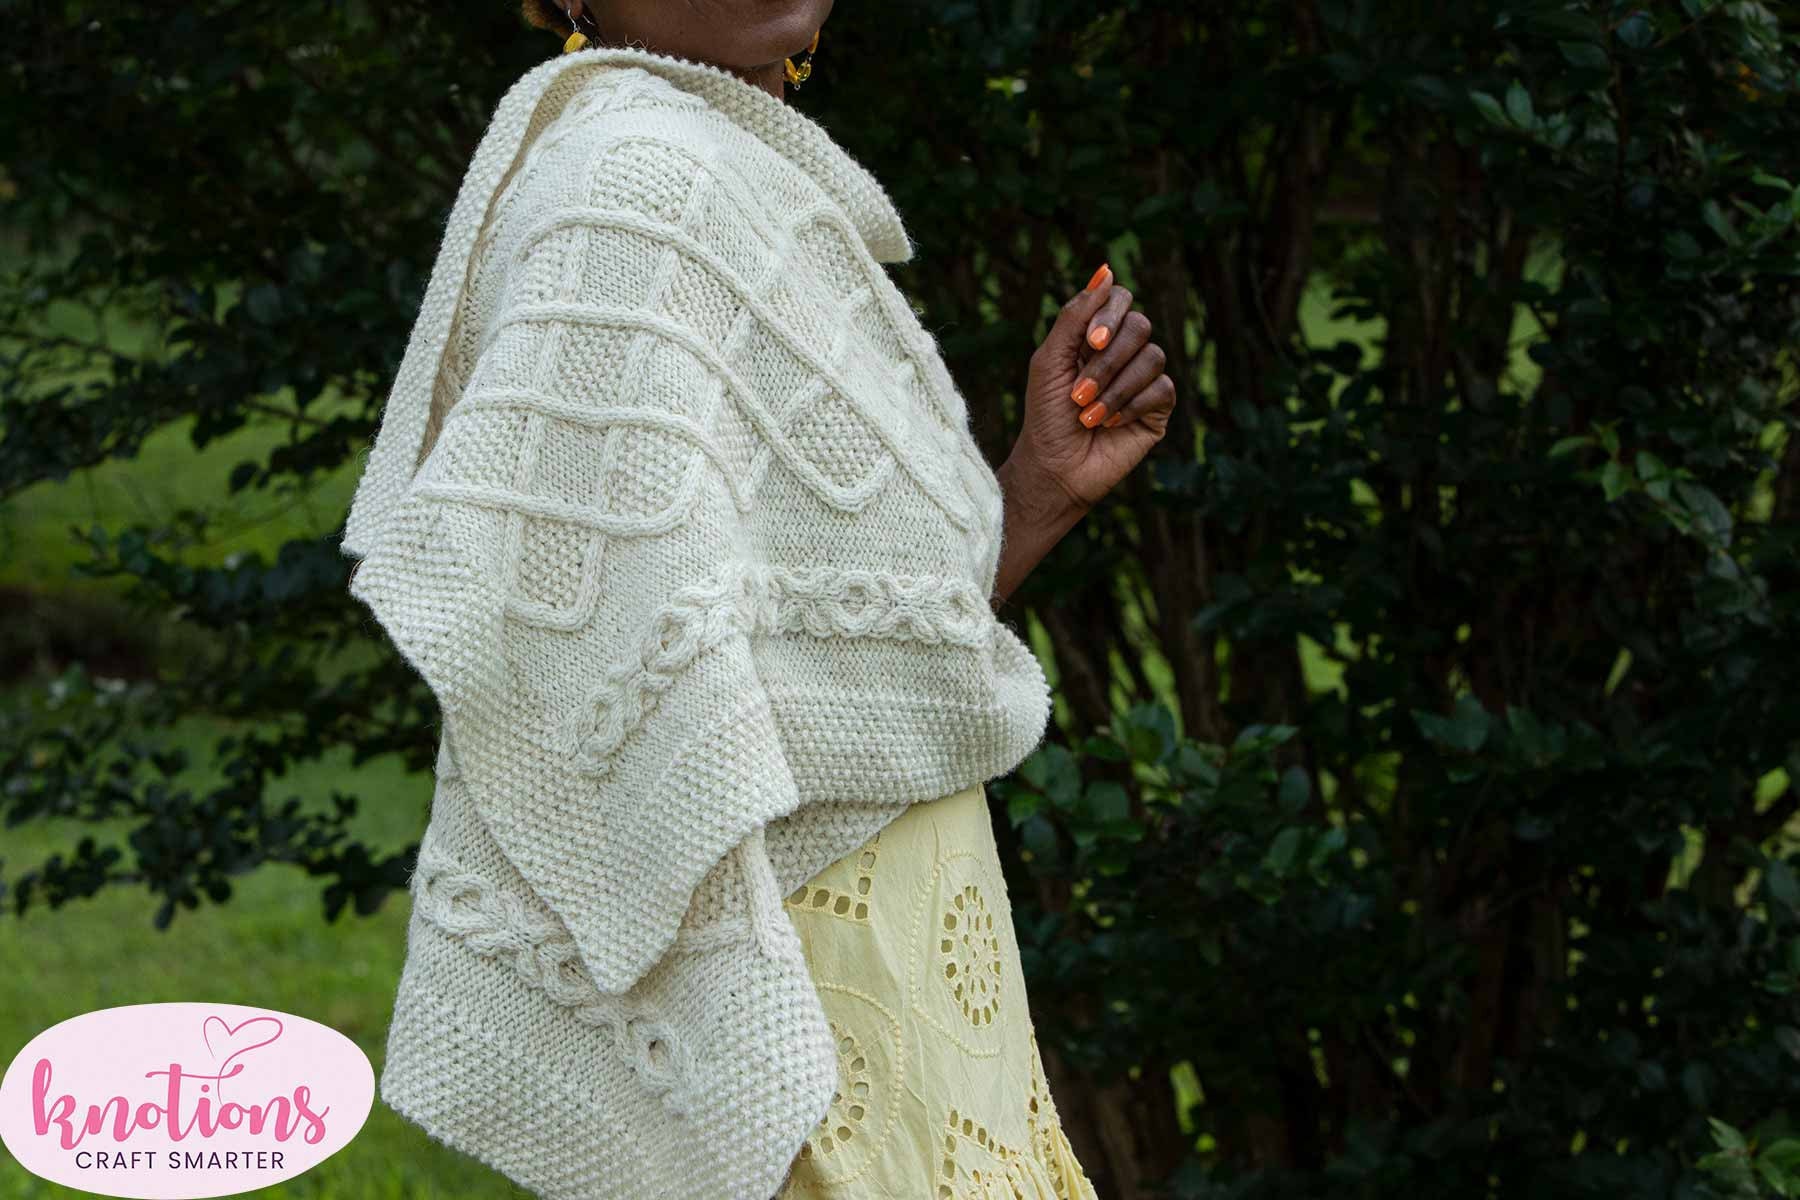 Side view of the Inishere Wrap, a knitted cabled shawl, worn over a summer dress by a smiling woman.